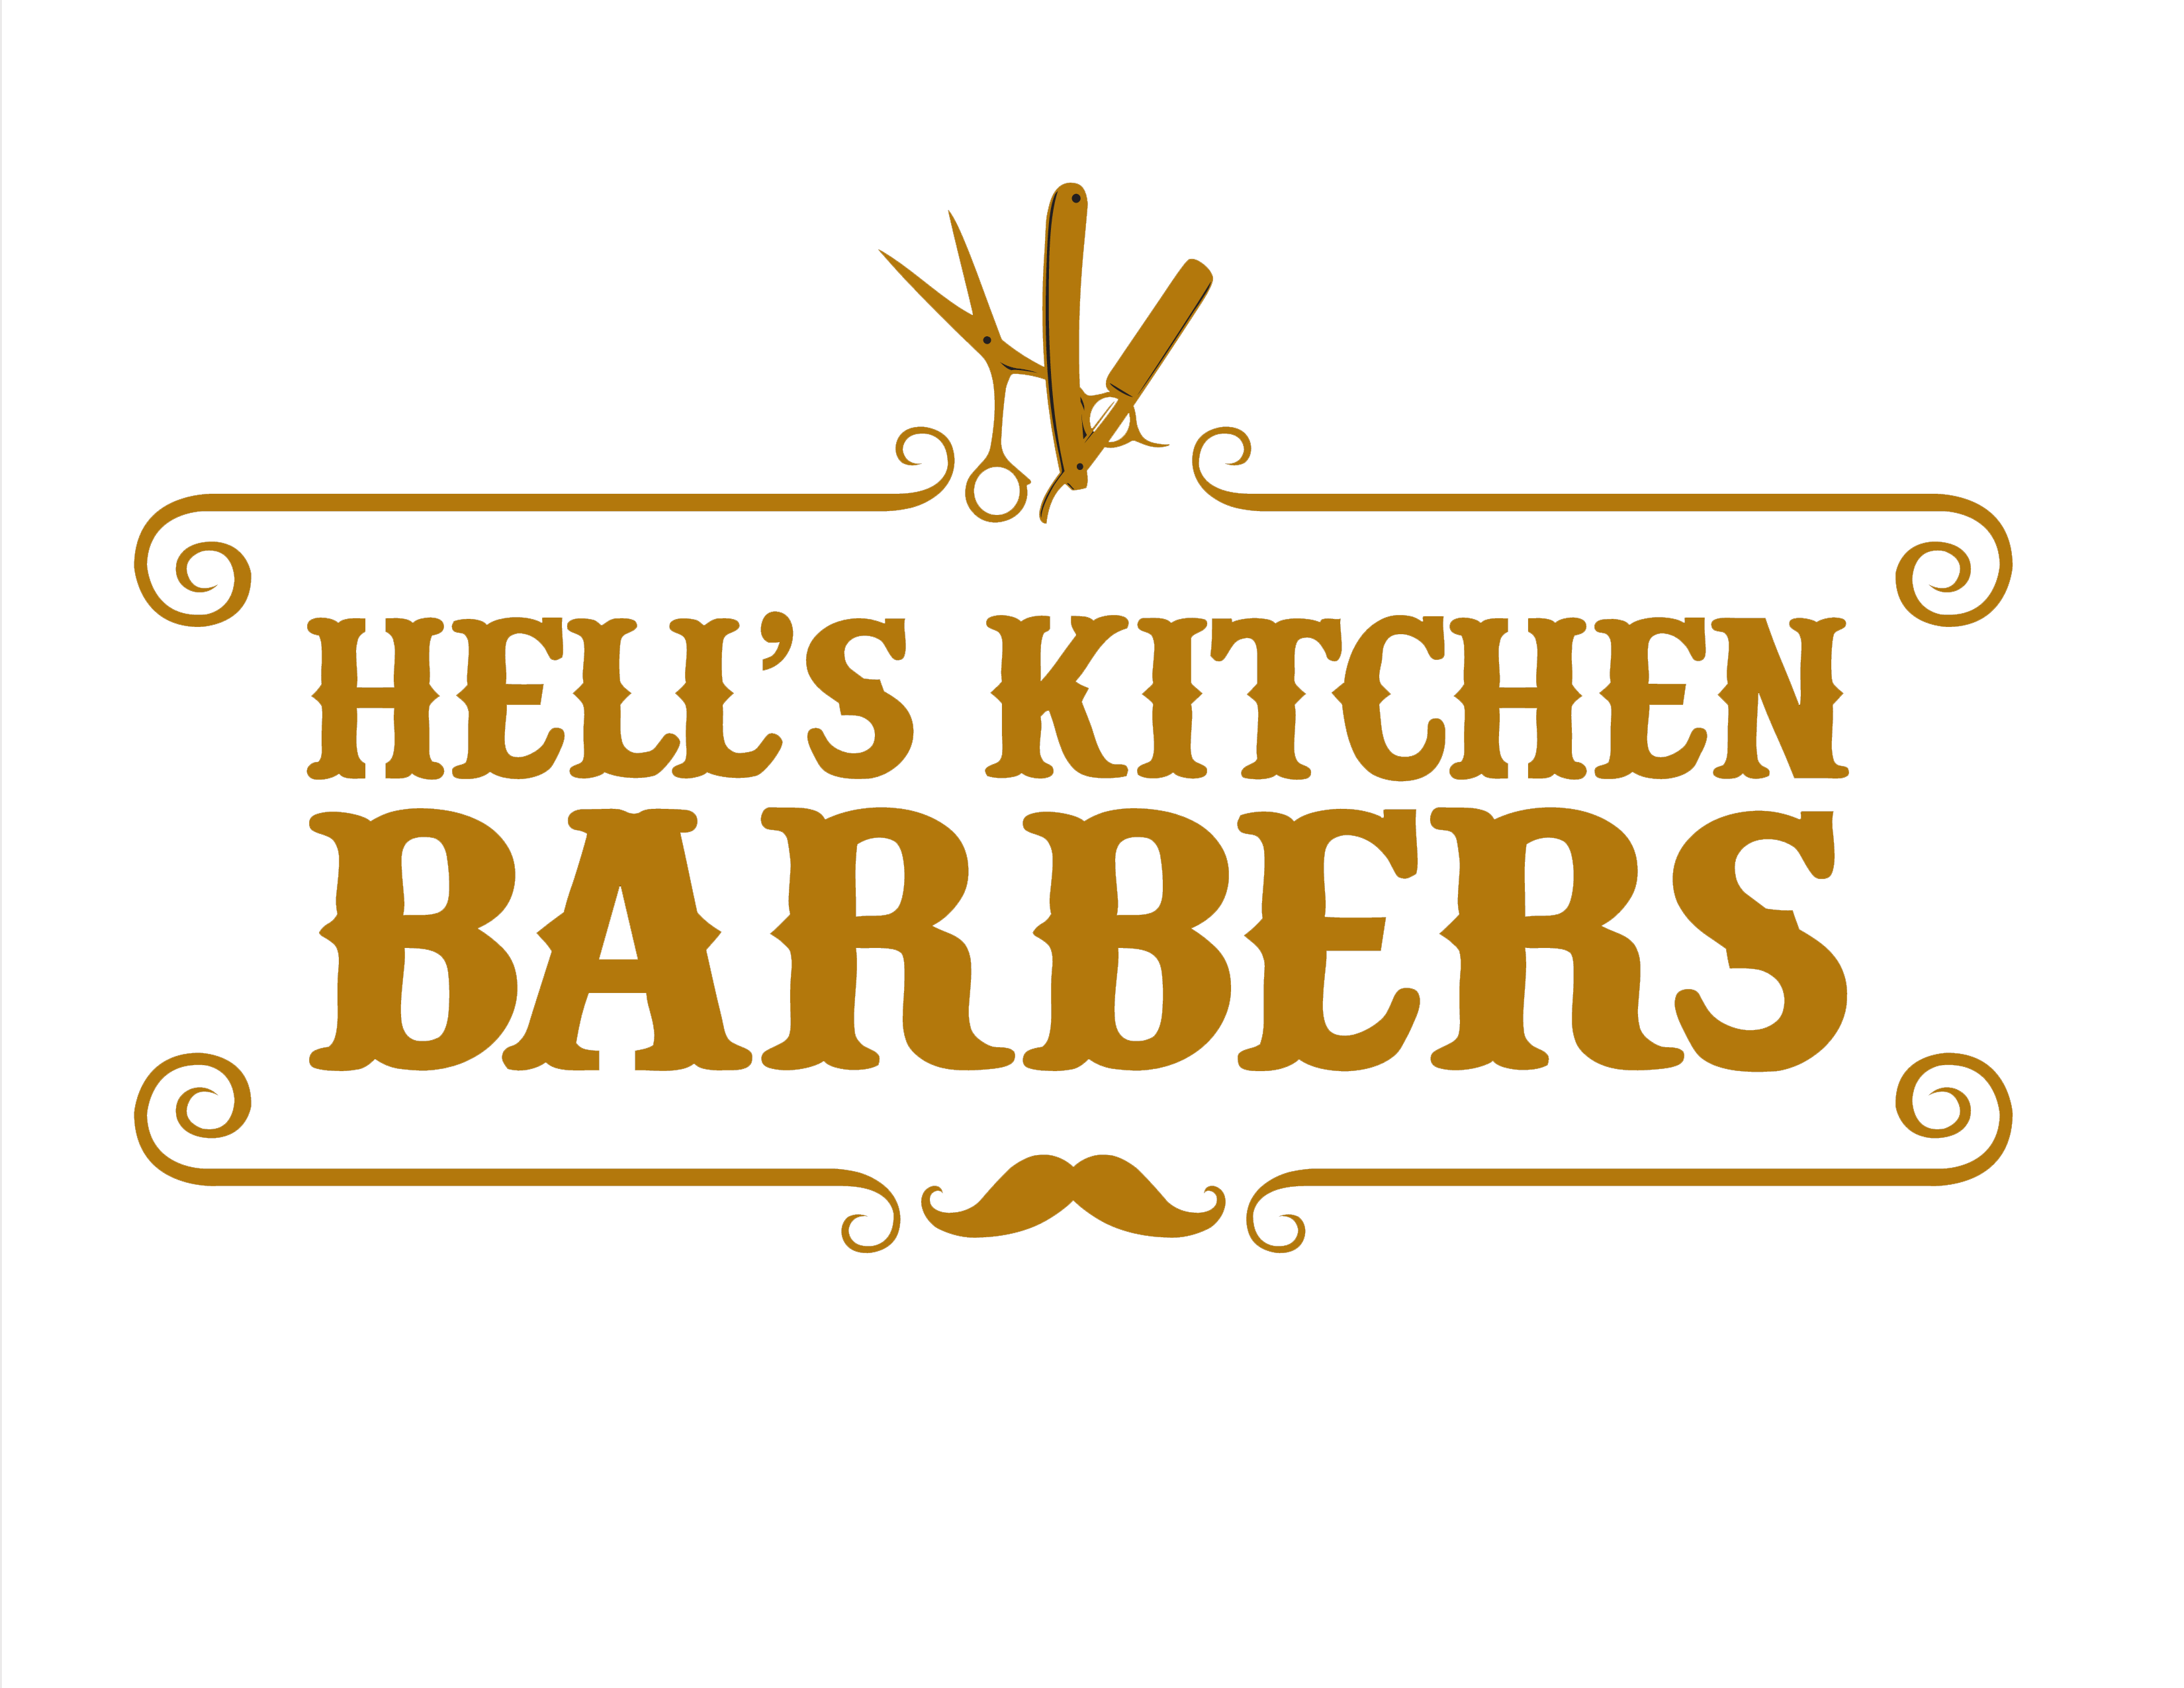 Business logo of Hell's Kitchen Barbers